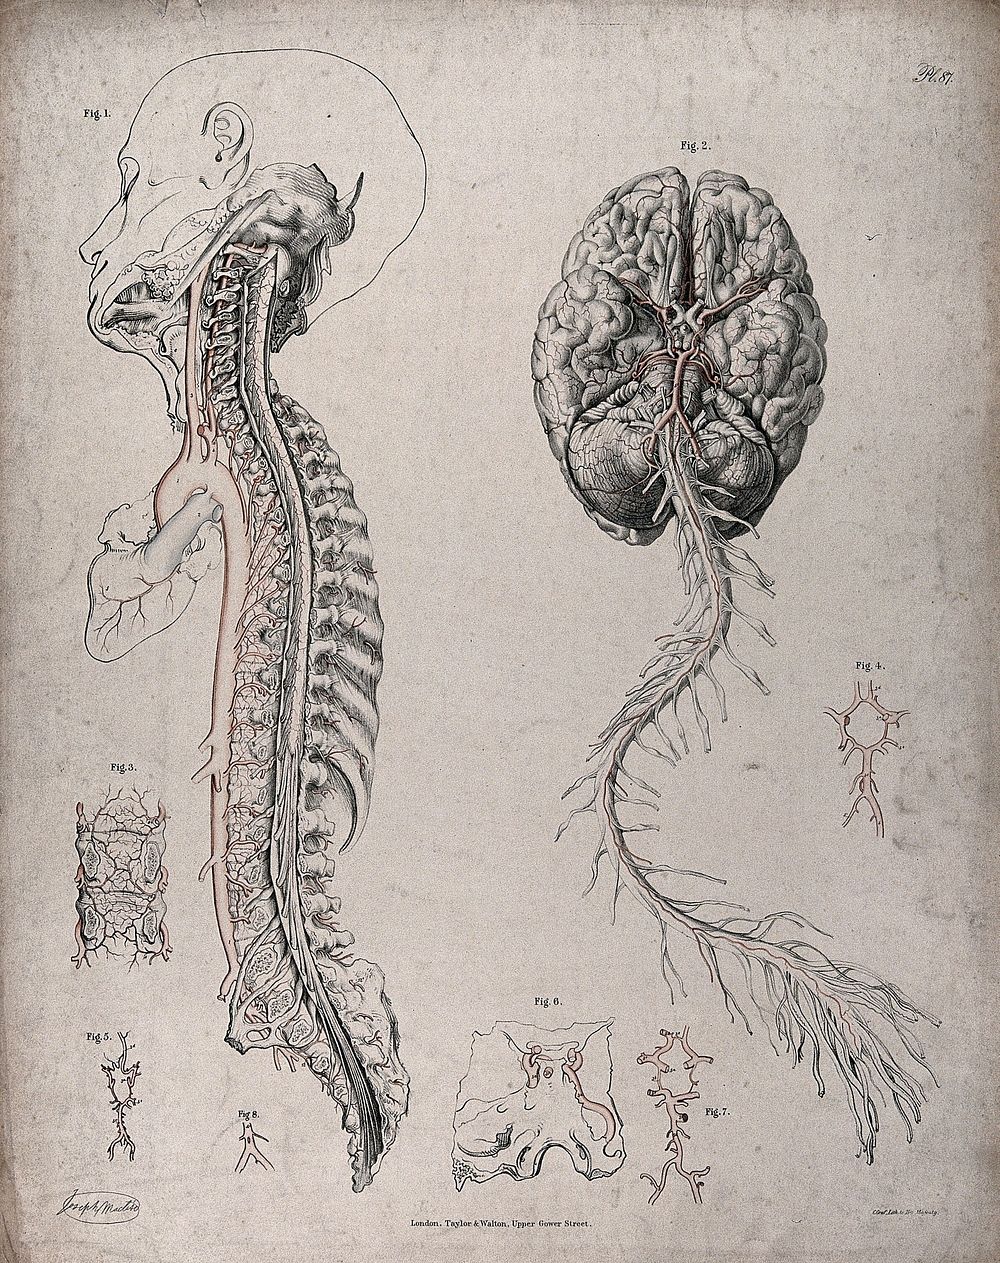 The circulatory system: dissections of the spinal column and the underside of the brain, with arteries and blood vessels…